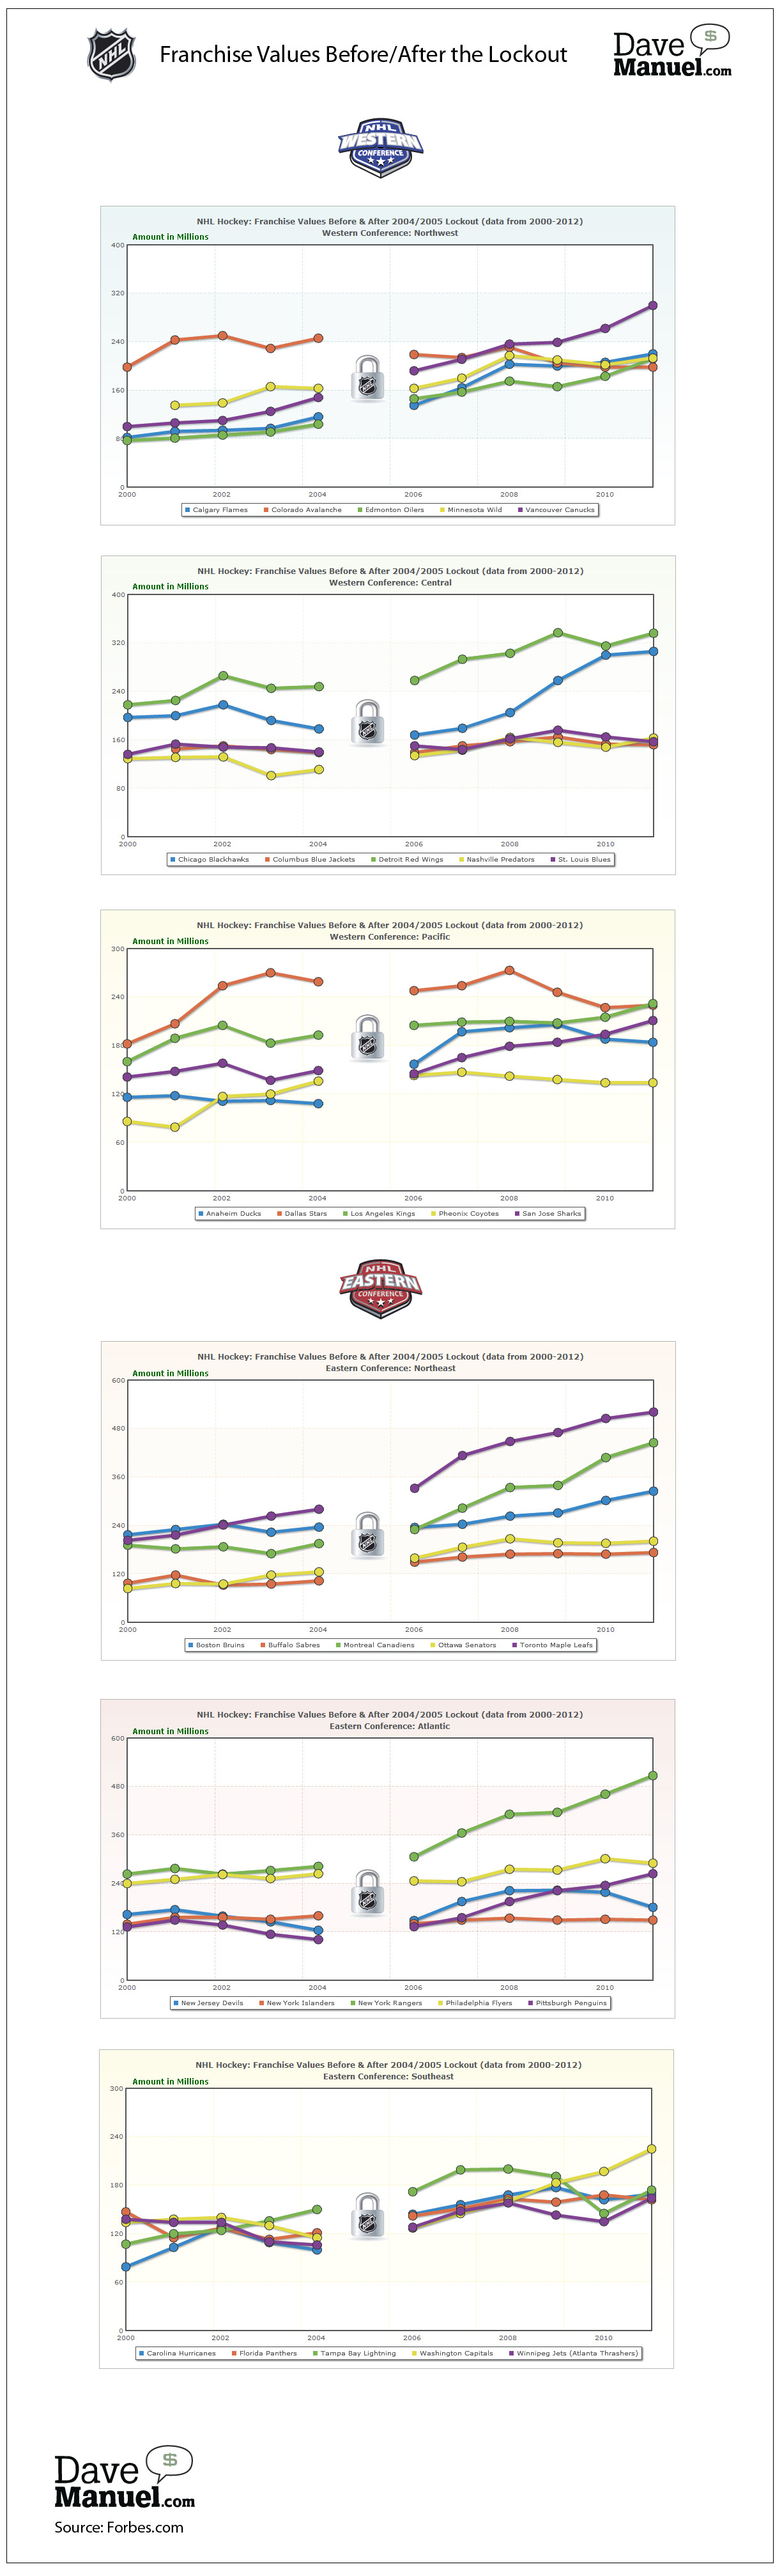 Infographic about growing NHL franchise values after the 2004/05 lockout - Compares charts of NHL teams and their values from 2000 - 2011 - Canucks, Rangers, Kings, Maple Leafs, Flames, Avalanche, Oilers, Wild, Blackhawks, Blue Jackets, Red Wings, Predators, Blues, Ducks, Stars, Coyotes, Sharks, Devils, Islanders, Flyers, Bruins, Sabres, Canadiens, Senators, Penguins, Hurricanes, Panthers, Lightning, Capitals, Thrashers